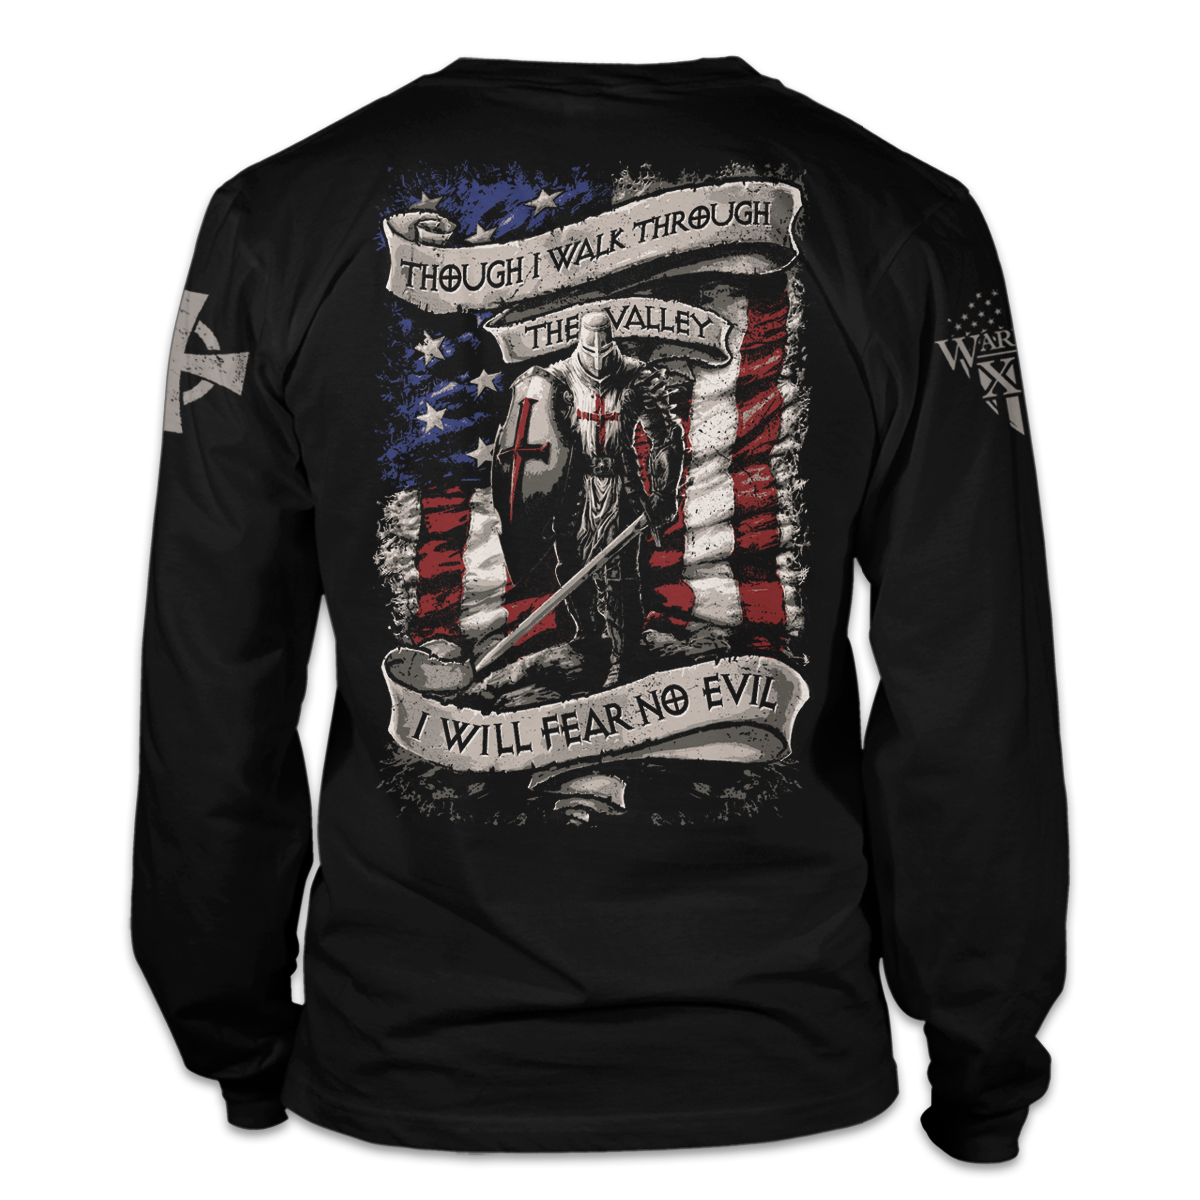 A black long sleeve shirt with an American Crusader printed on the back of the shirt.